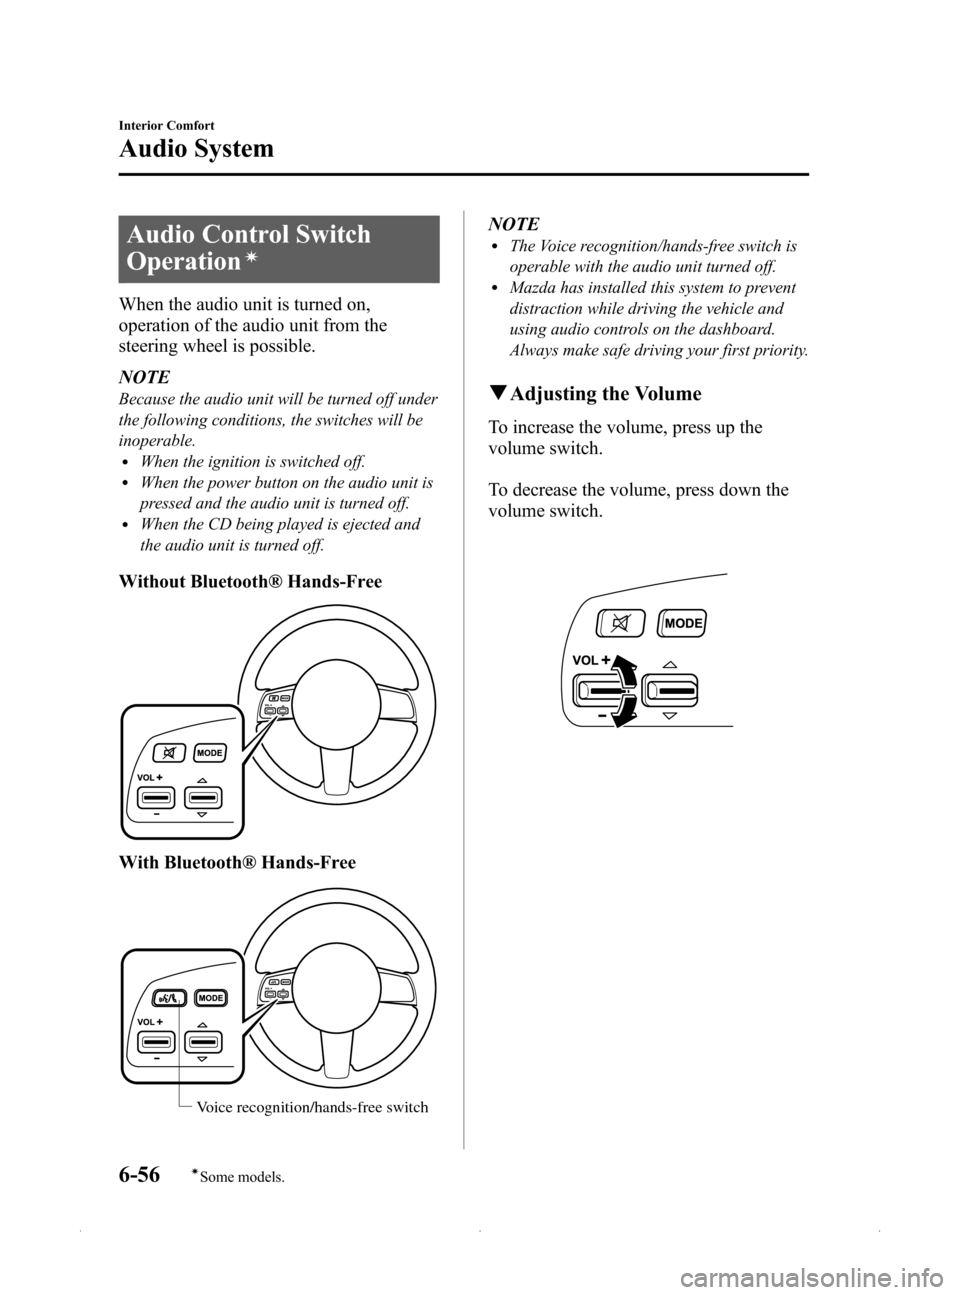 MAZDA MODEL MX-5 2015  Owners Manual (in English) Black plate (268,1)
Audio Control Switch
Operation
í
When the audio unit is turned on,
operation of the audio unit from the
steering wheel is possible.
NOTE
Because the audio unit will be turned off 